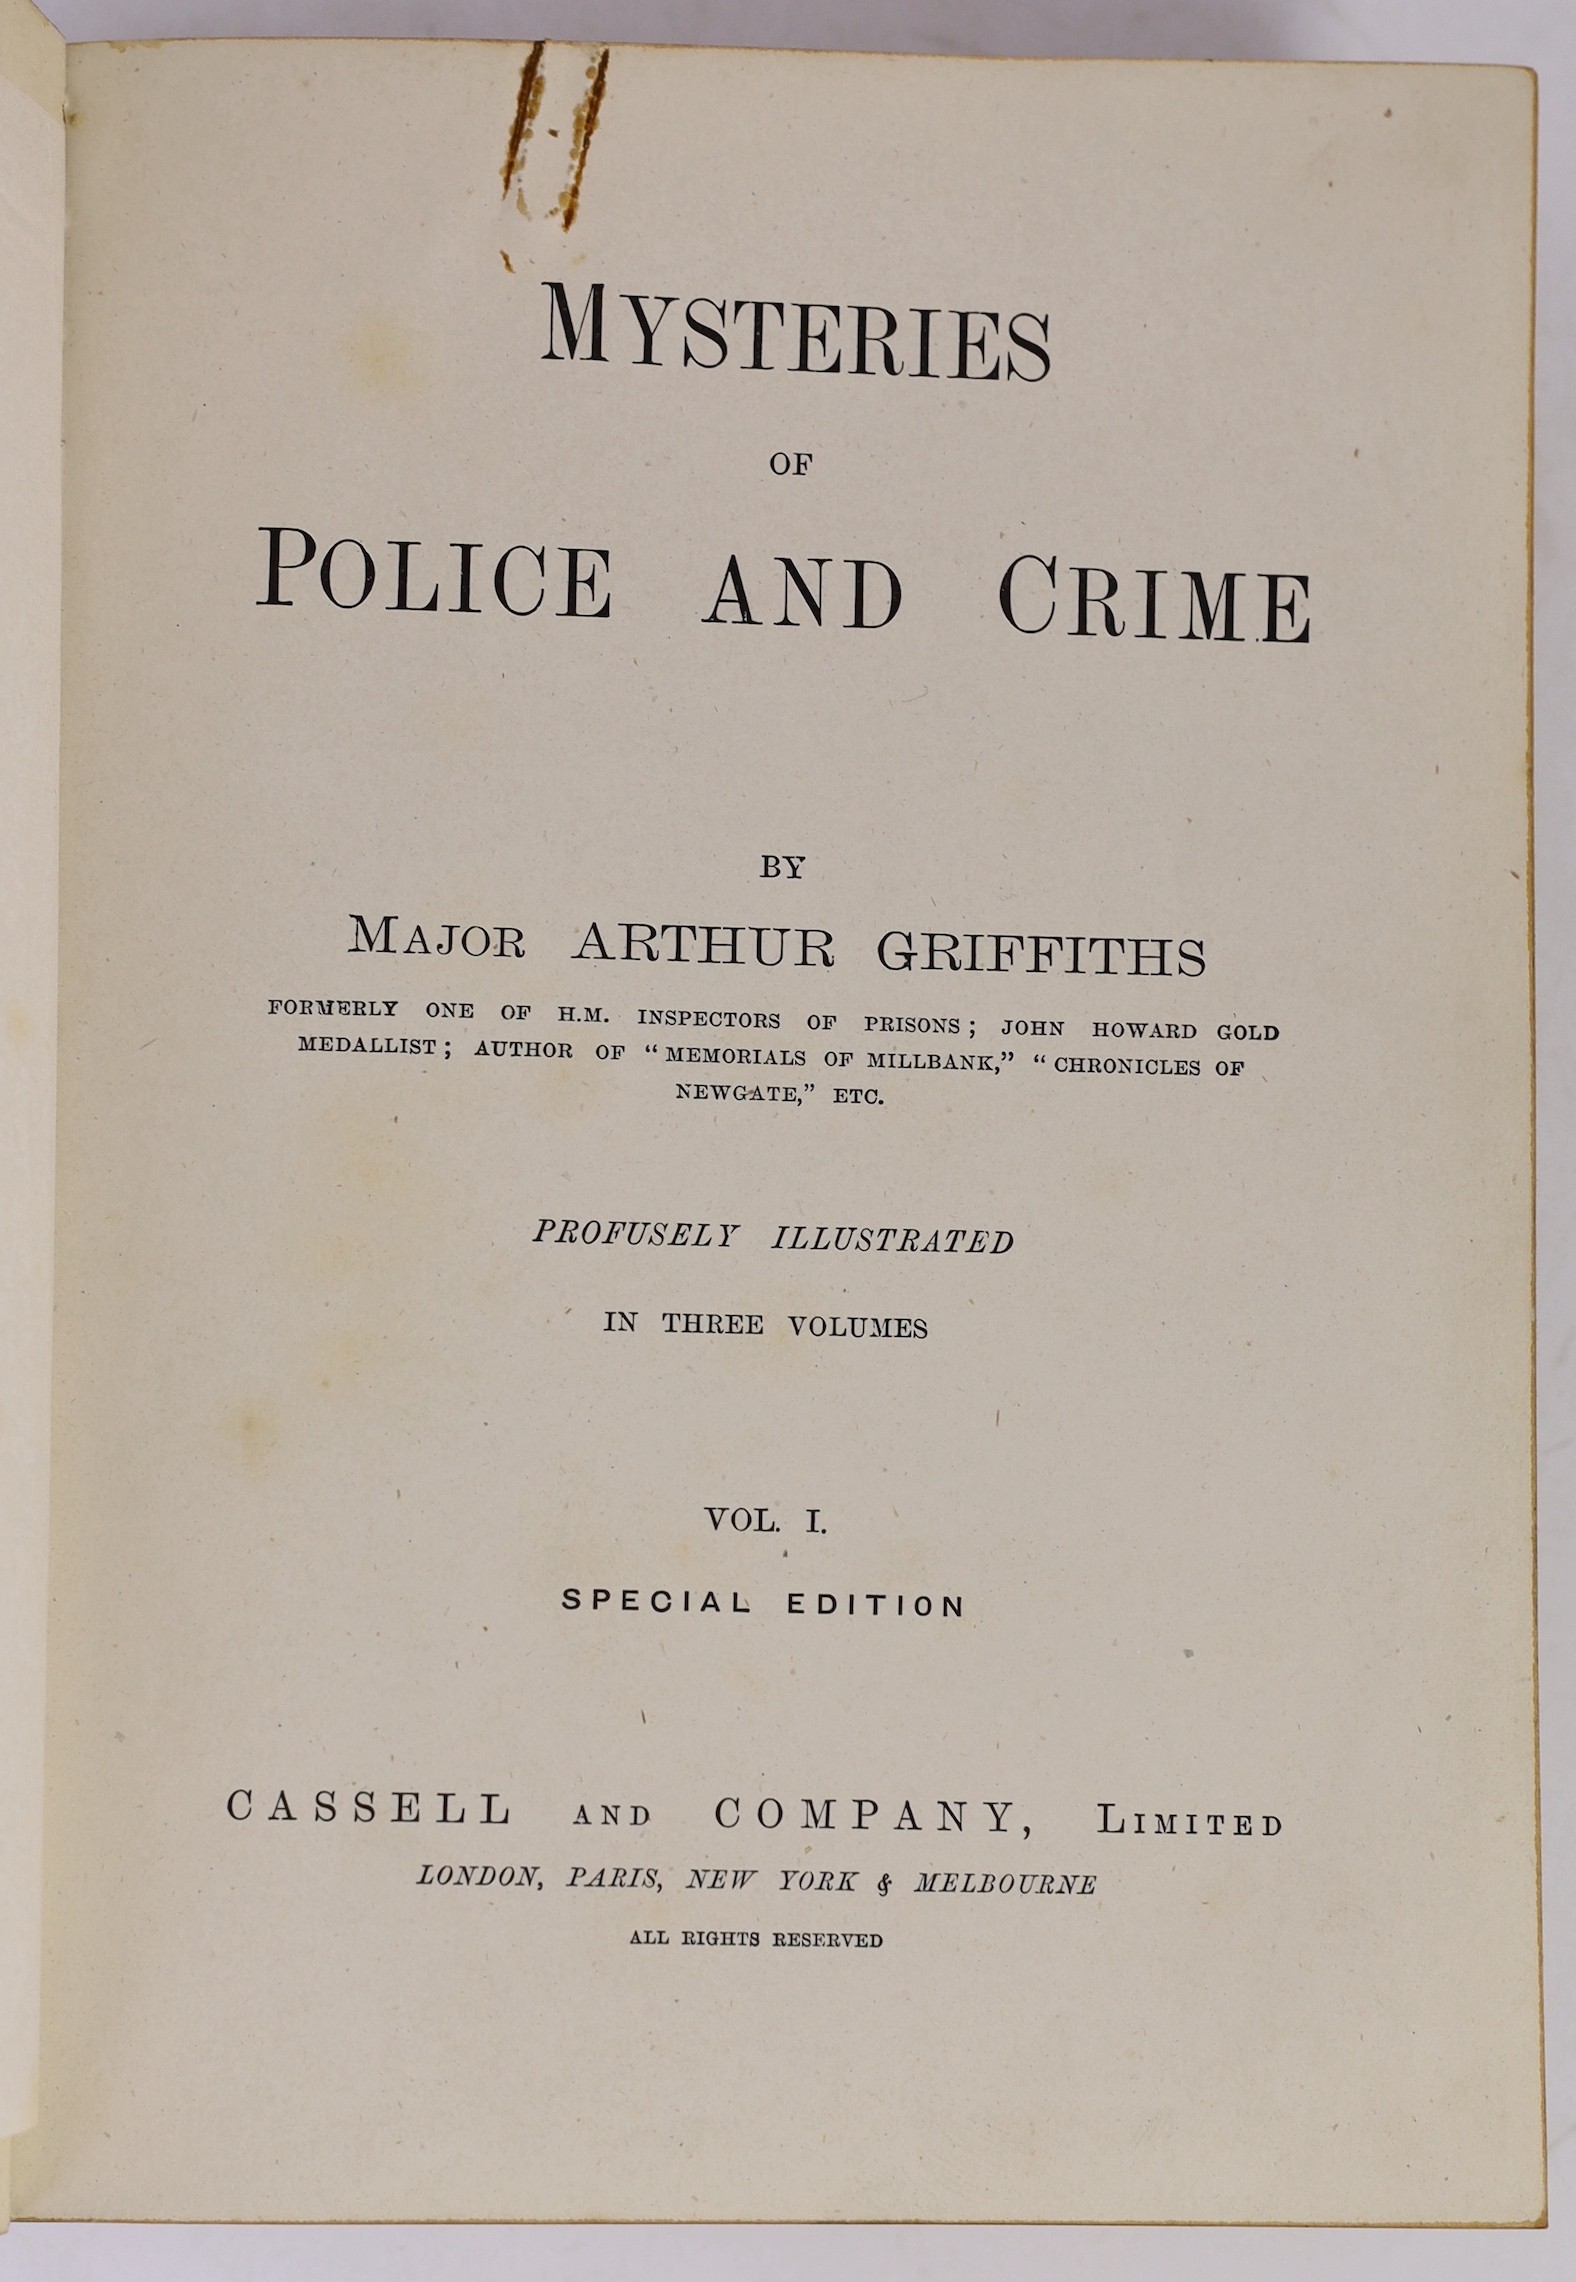 Griffiths, Maj. Arthur - Mysteries of Police and Crime. Special Edition, 3 vols. portrait plates and many text illus. (some full page); publisher's gilt cloth. (ca.1900)